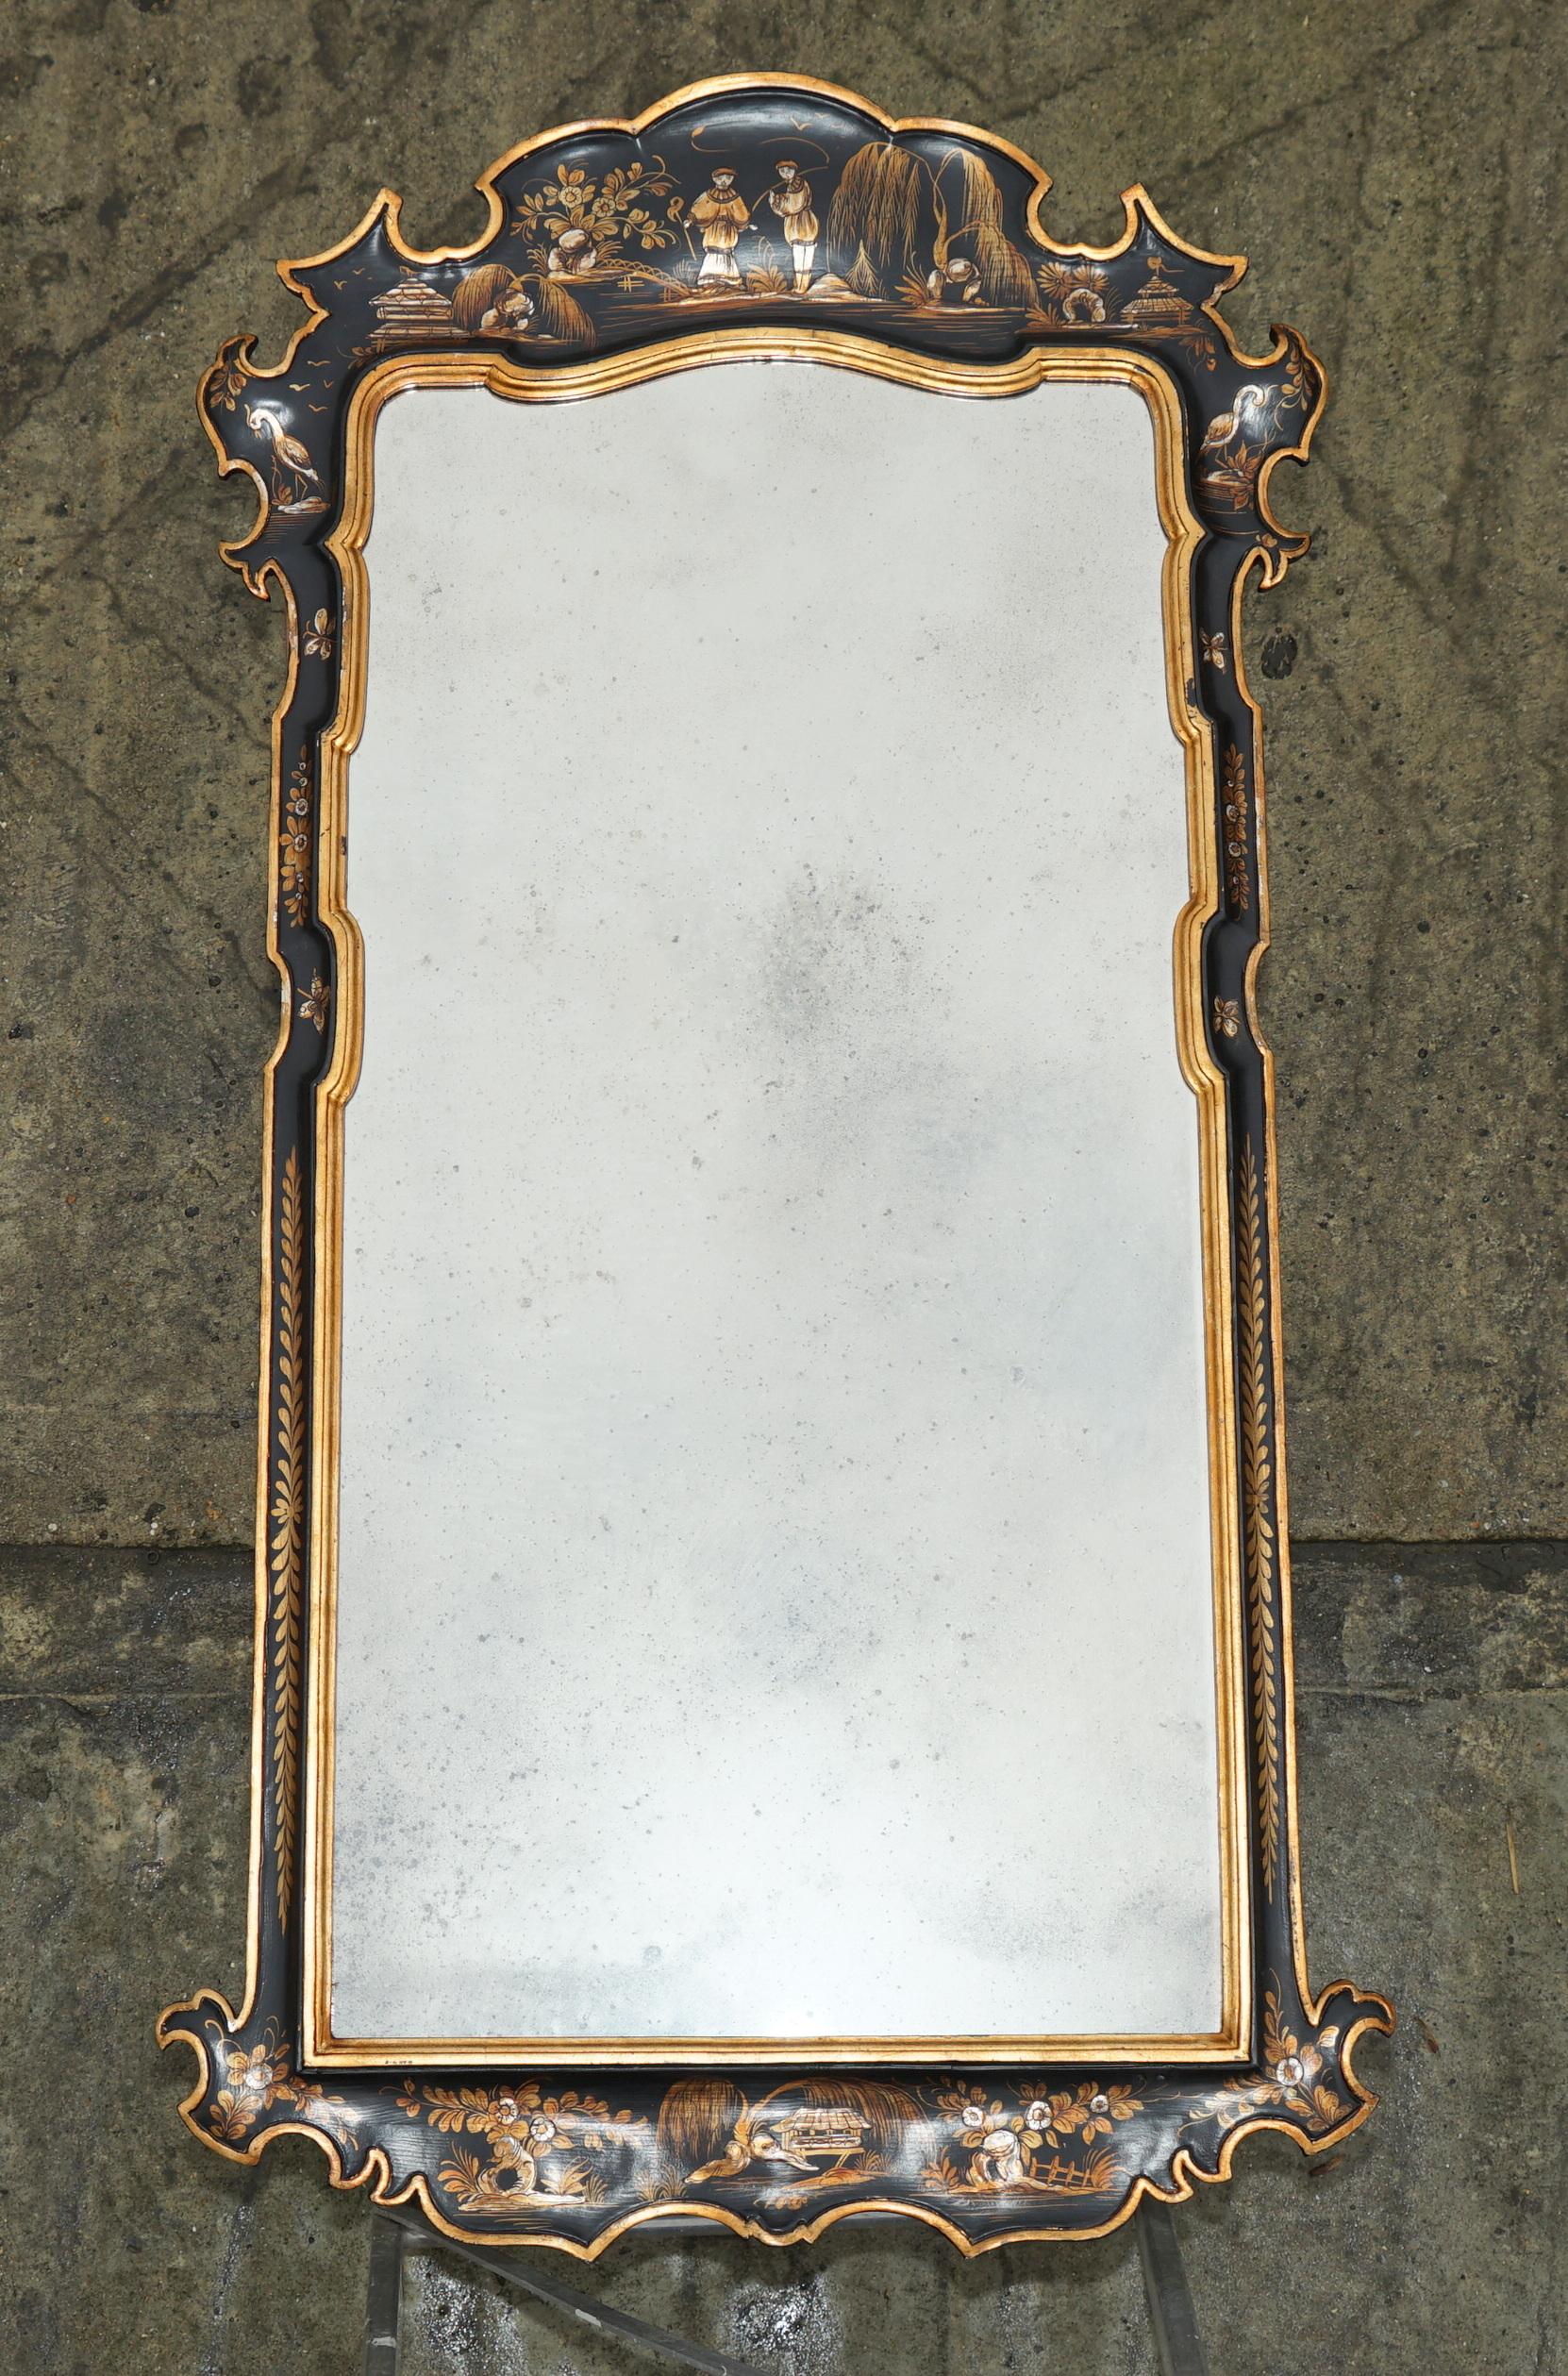 Royal House Antiques

Royal House Antiques is delighted to offer for sale this absolutely sublime, circa 1960's large Chinese Chinoiserie wall mirror with original foxed glass plate and period painted finish, stamped to the rear Made in